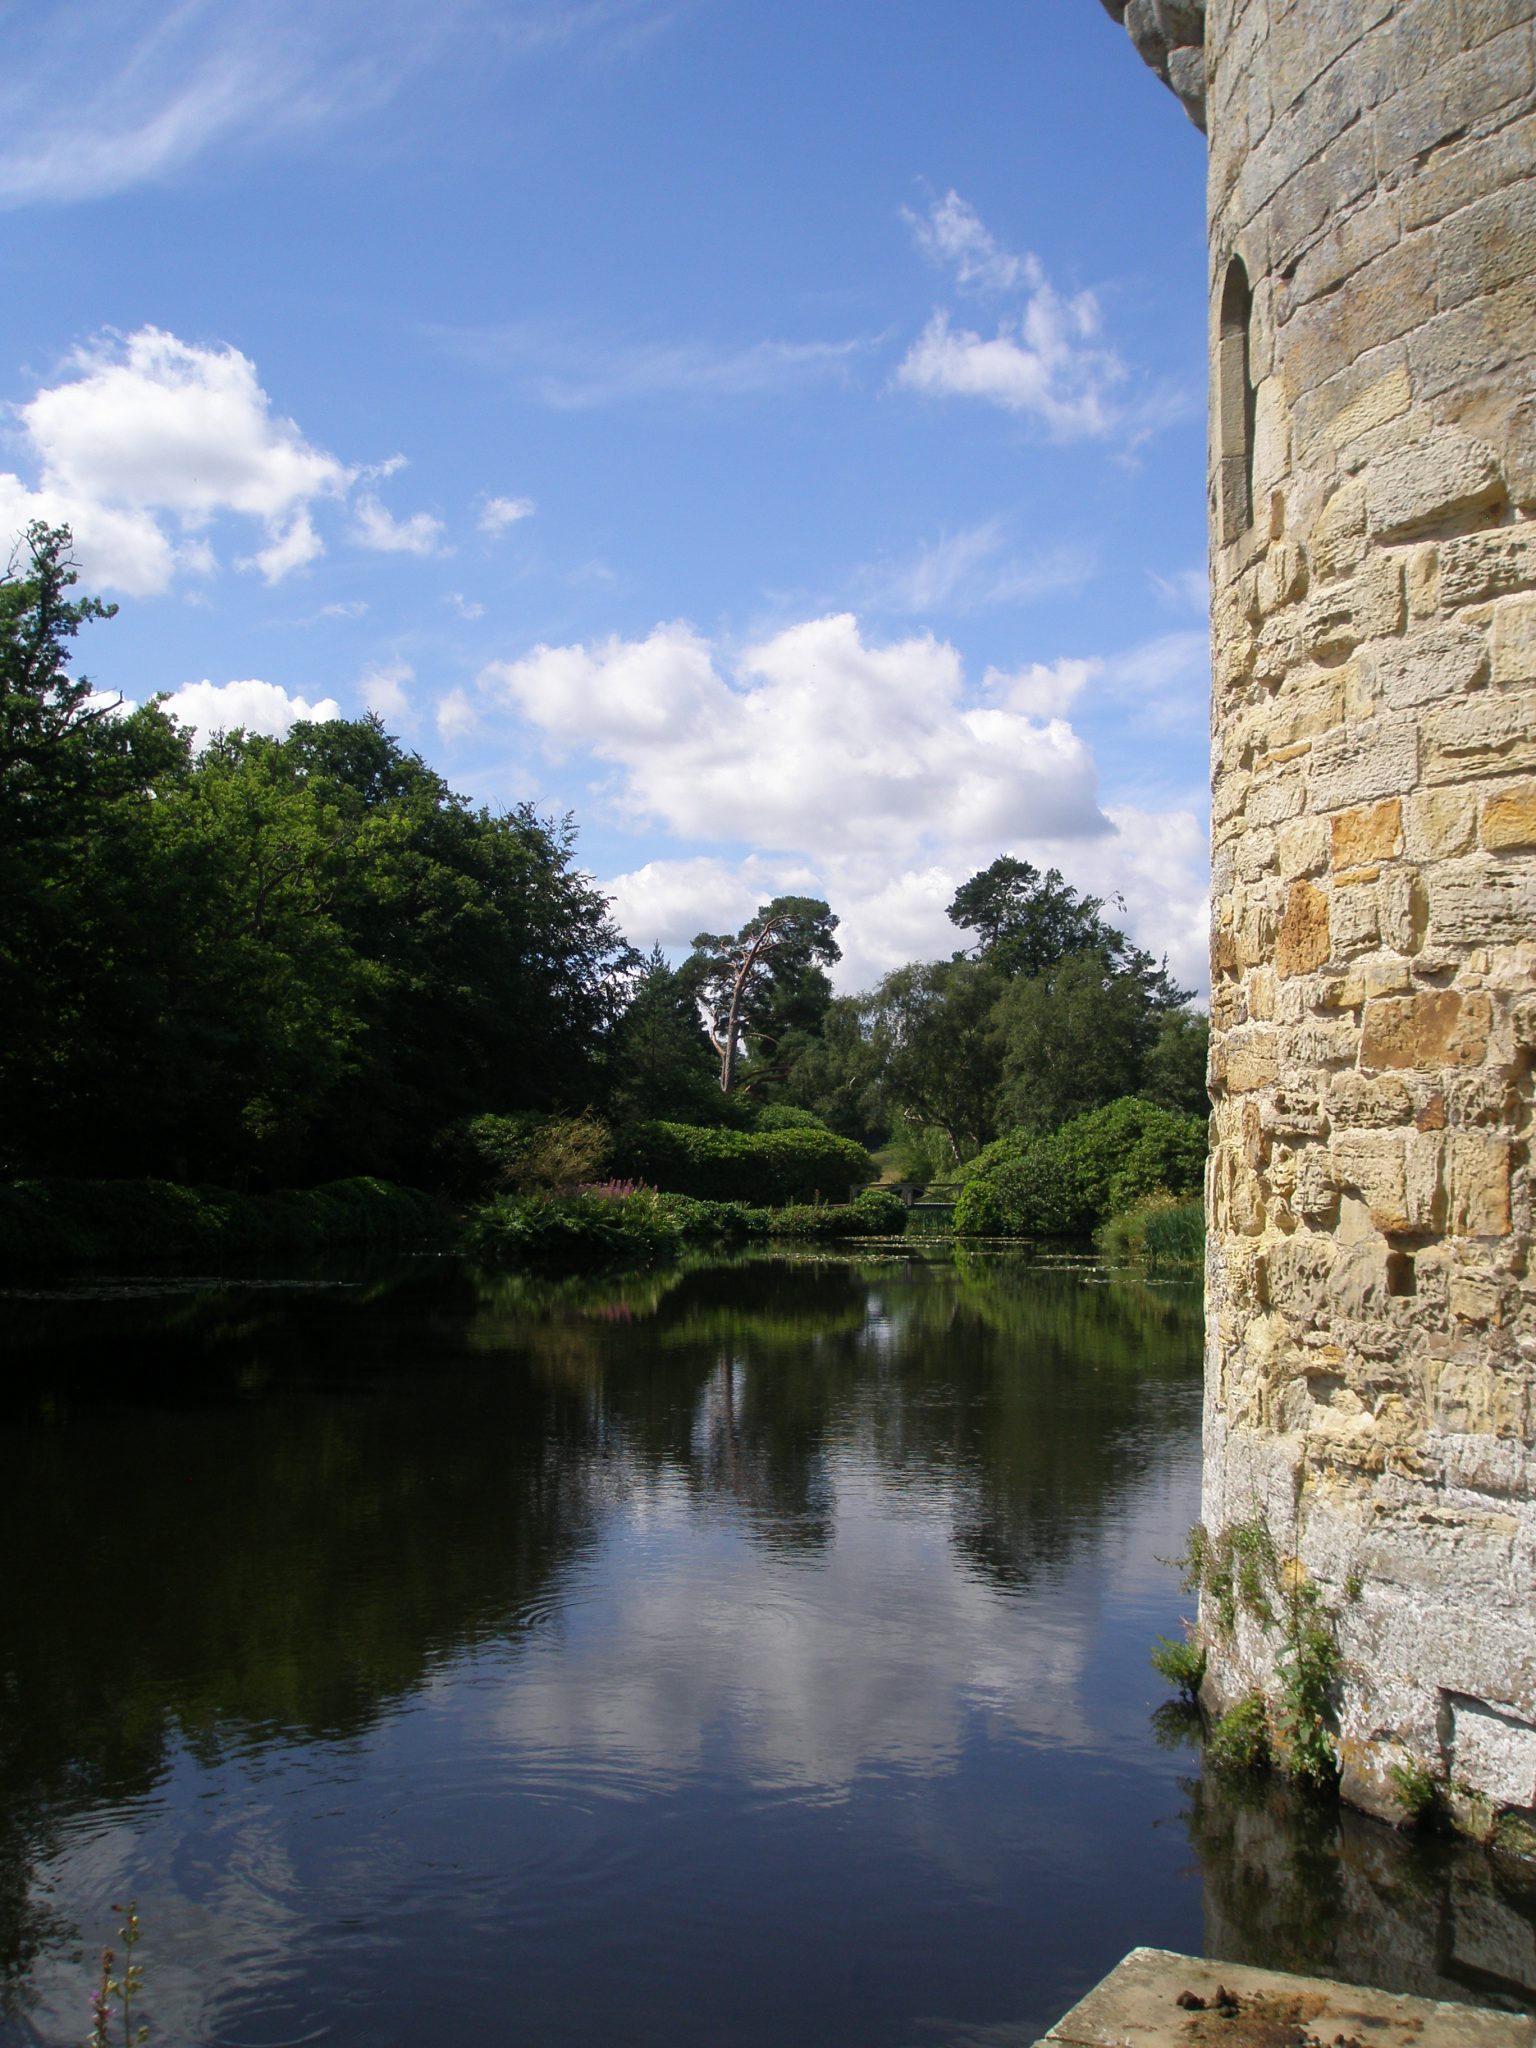 A view across the Moat, from behind the Old Castle's tower.